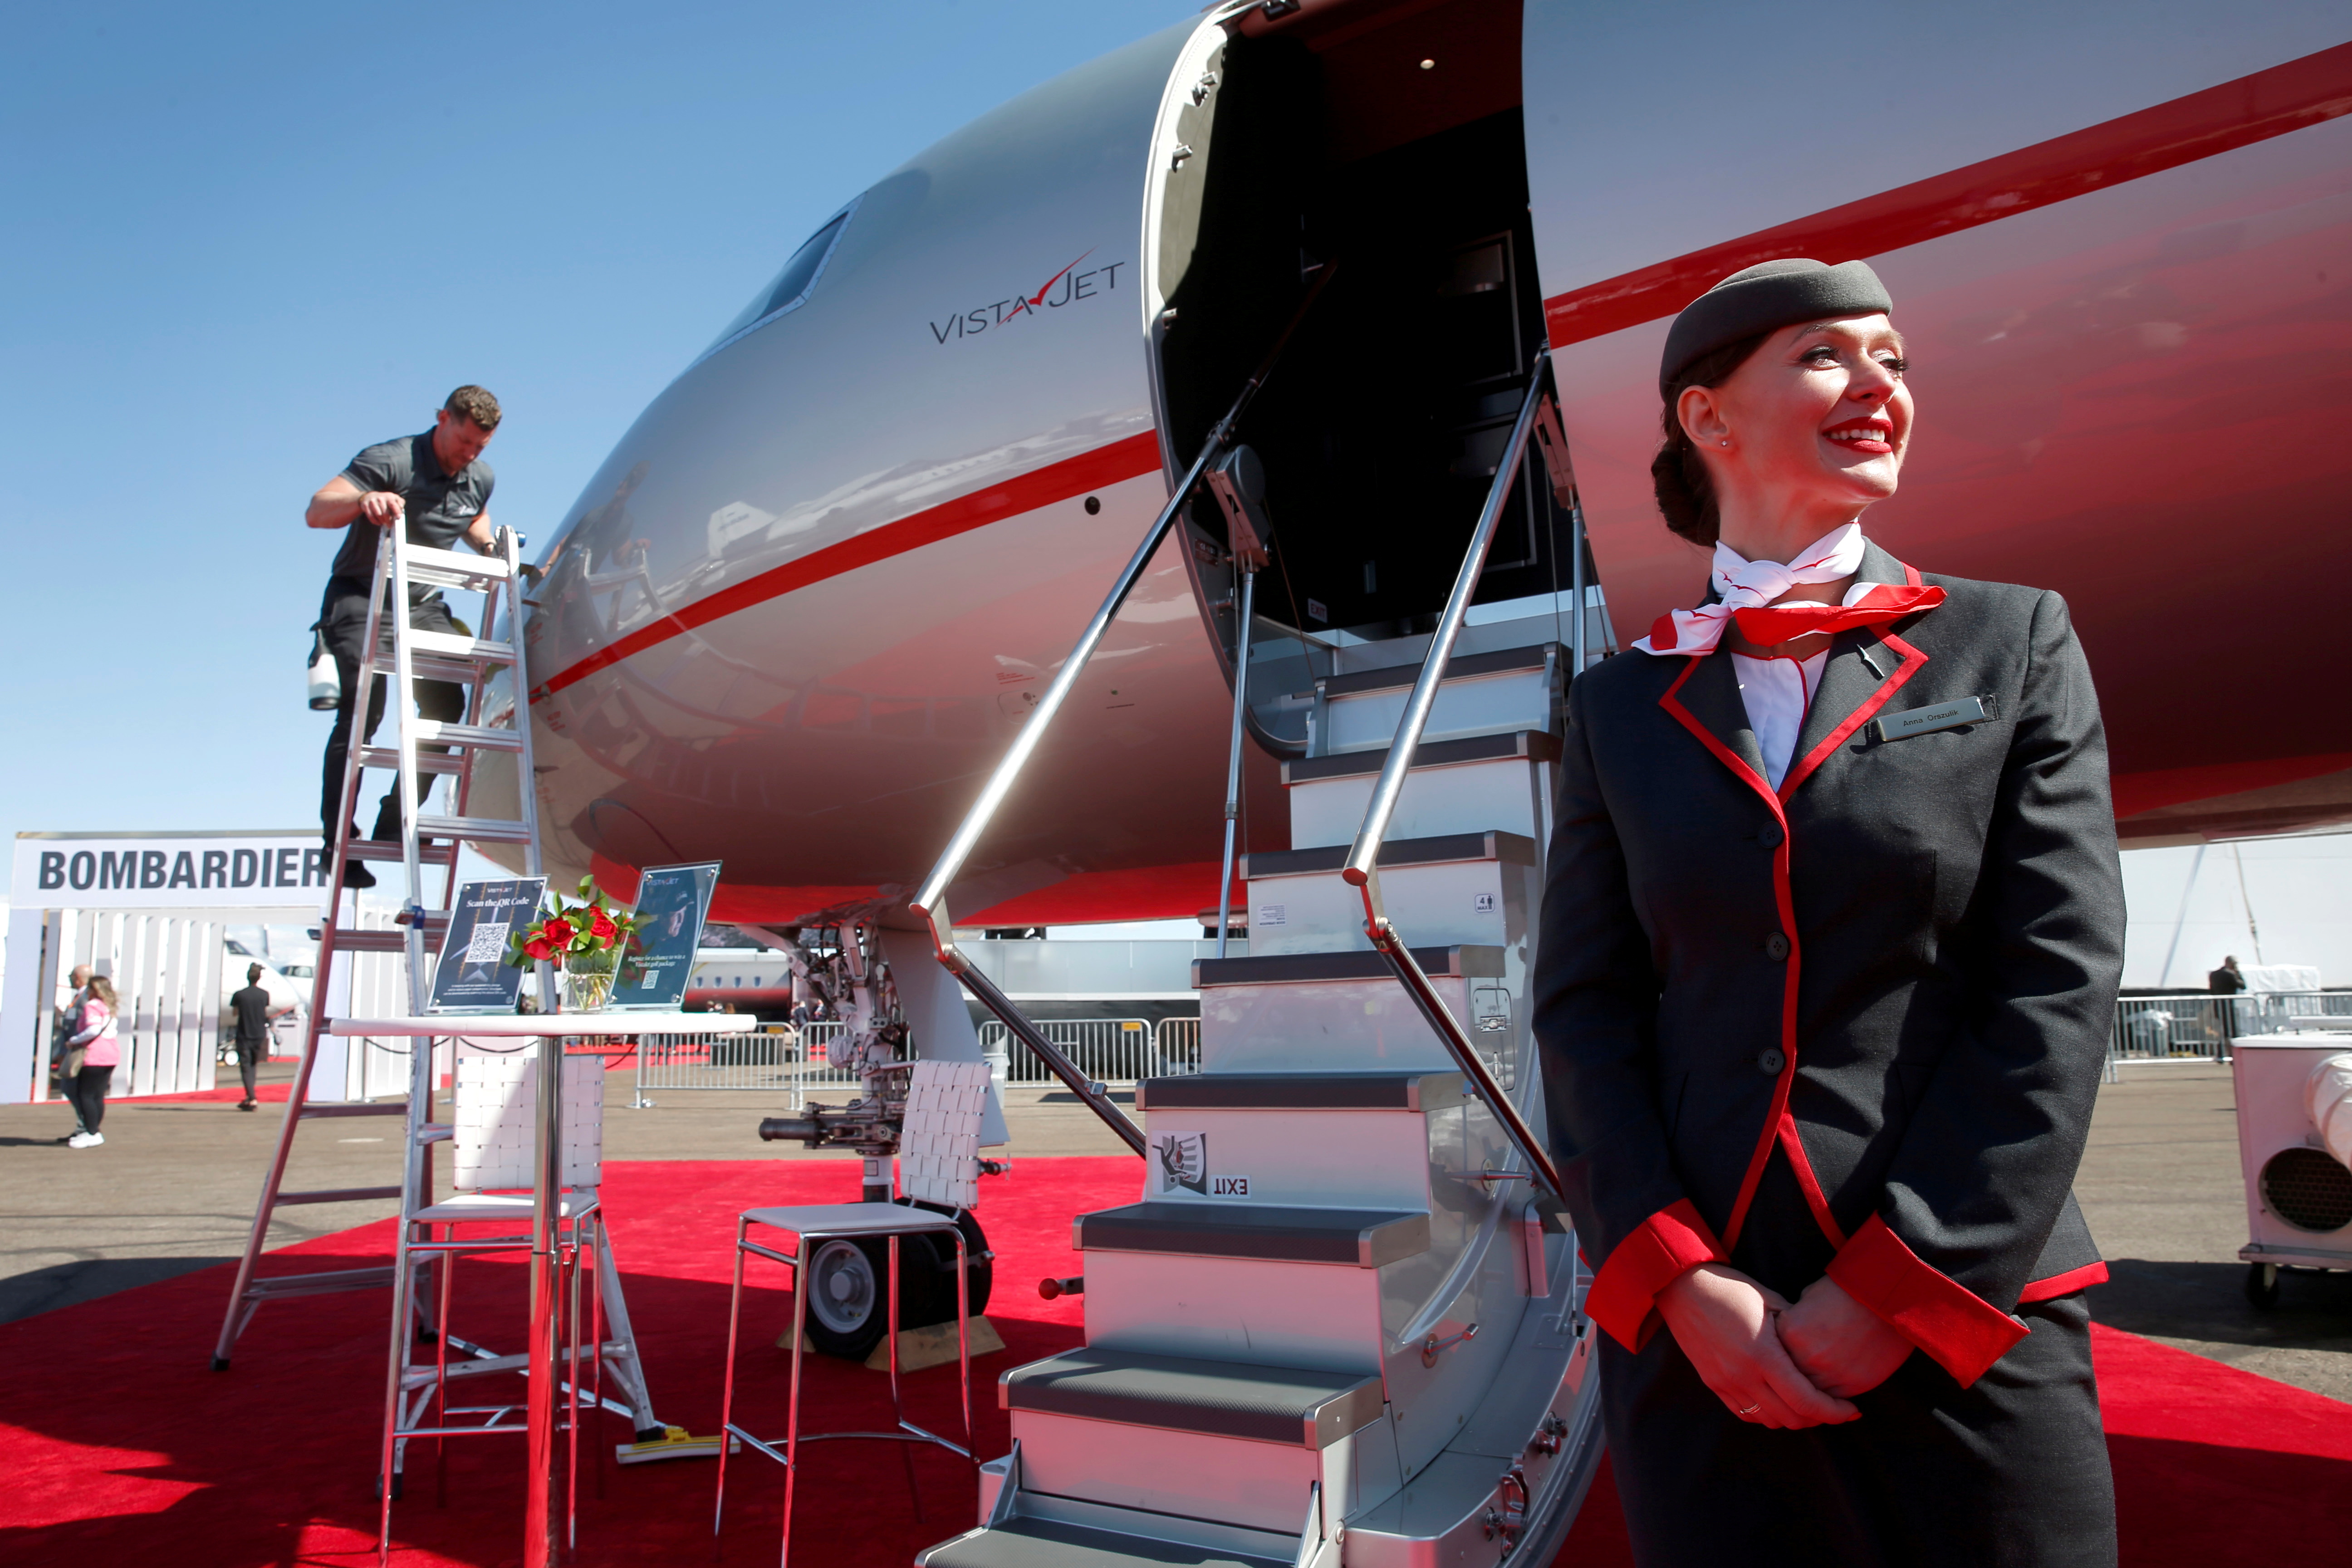 World's largest air show for business jets opens, in Henderson